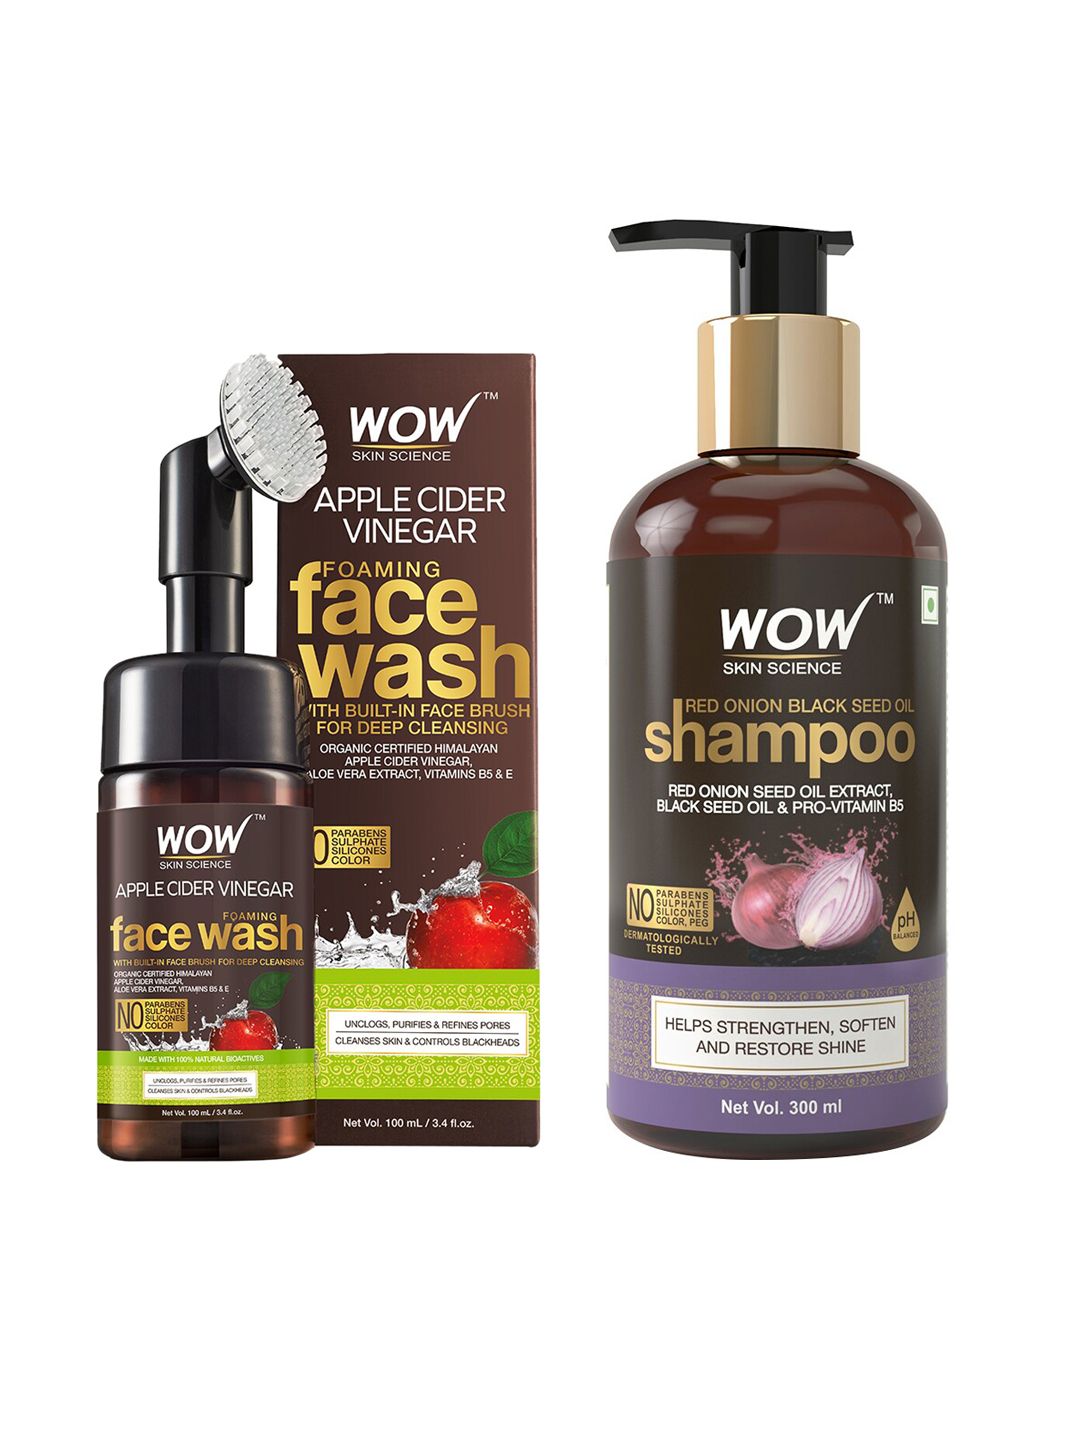 WOW SKIN SCIENCE Set of Shampoo & Face Wash with Built-In Brush Price in India